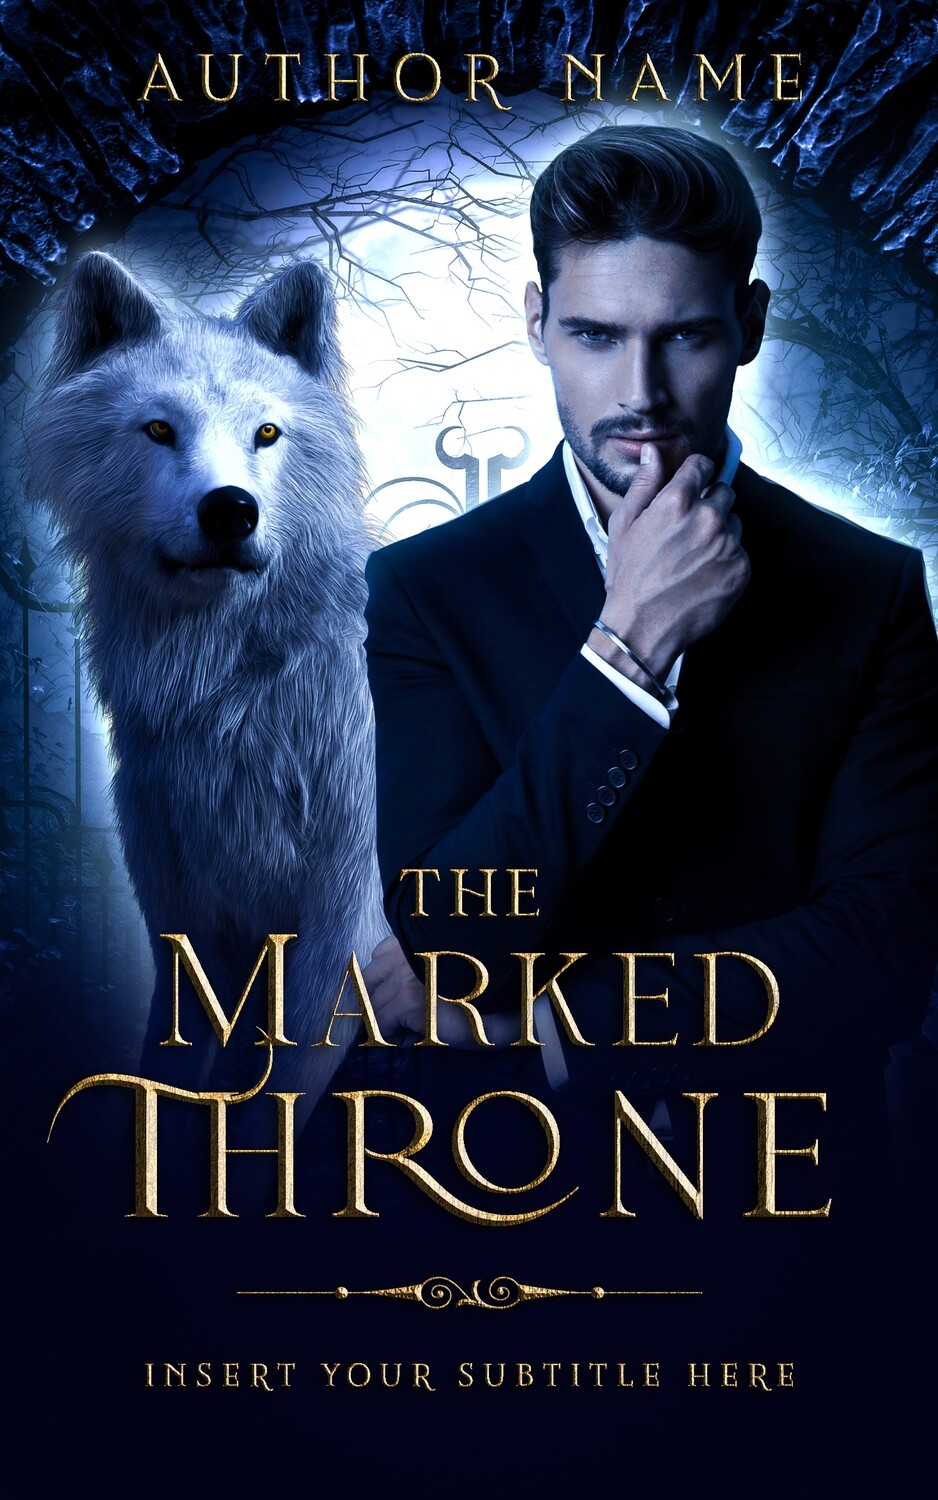 Ebook: The Marked Throne